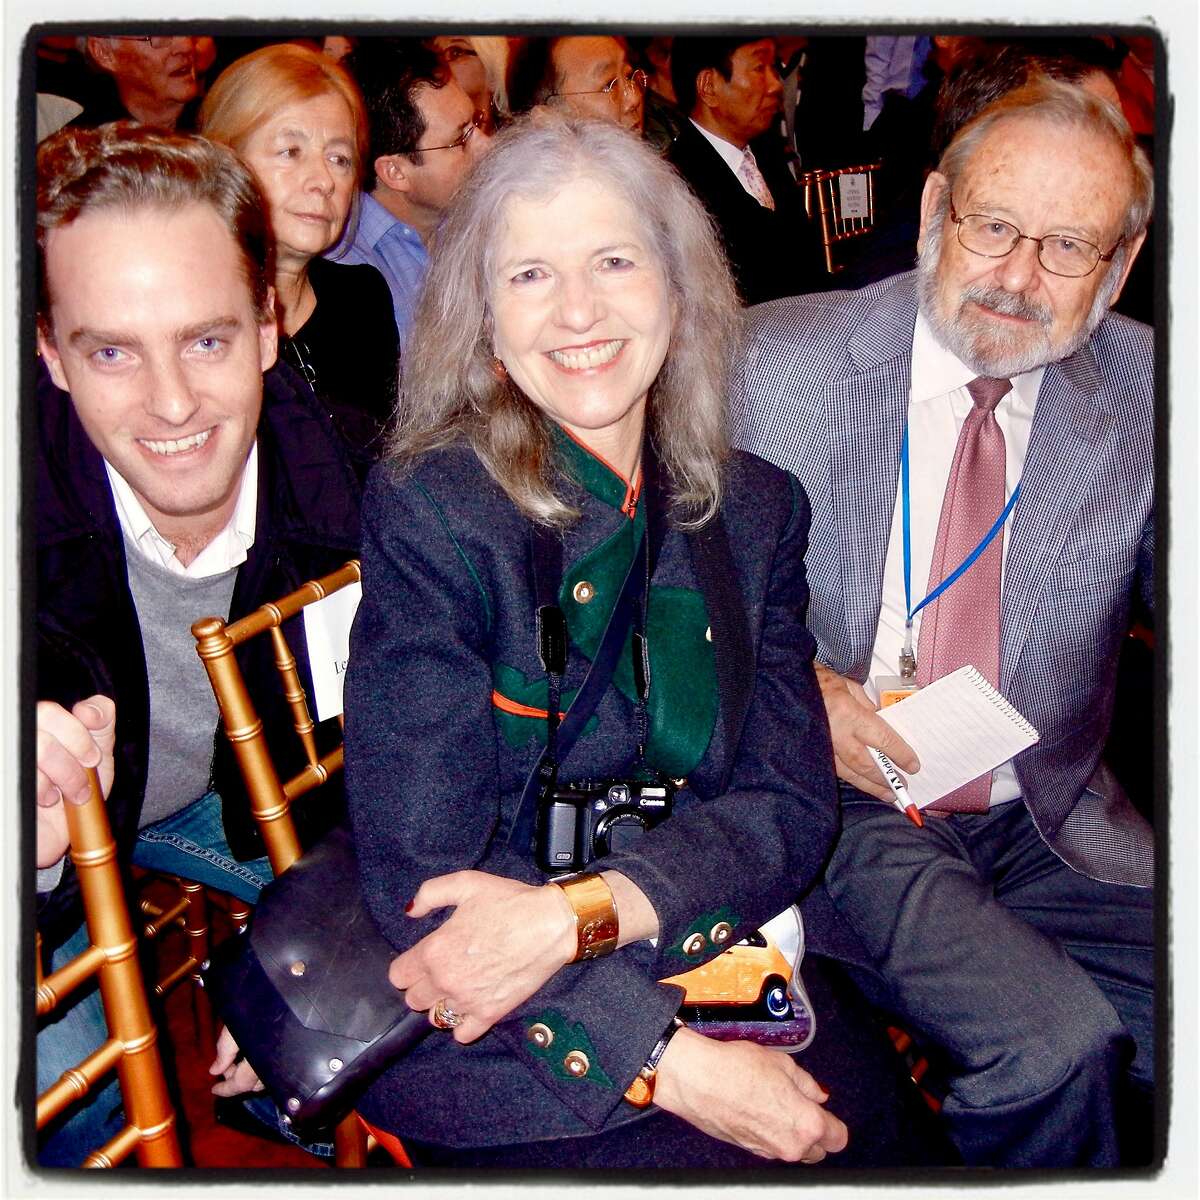 Chronicle columnist Carl Nolte (at left) on the beat with his colleagues Will Hearst IV and columnist Leah Garchik. January 2013.